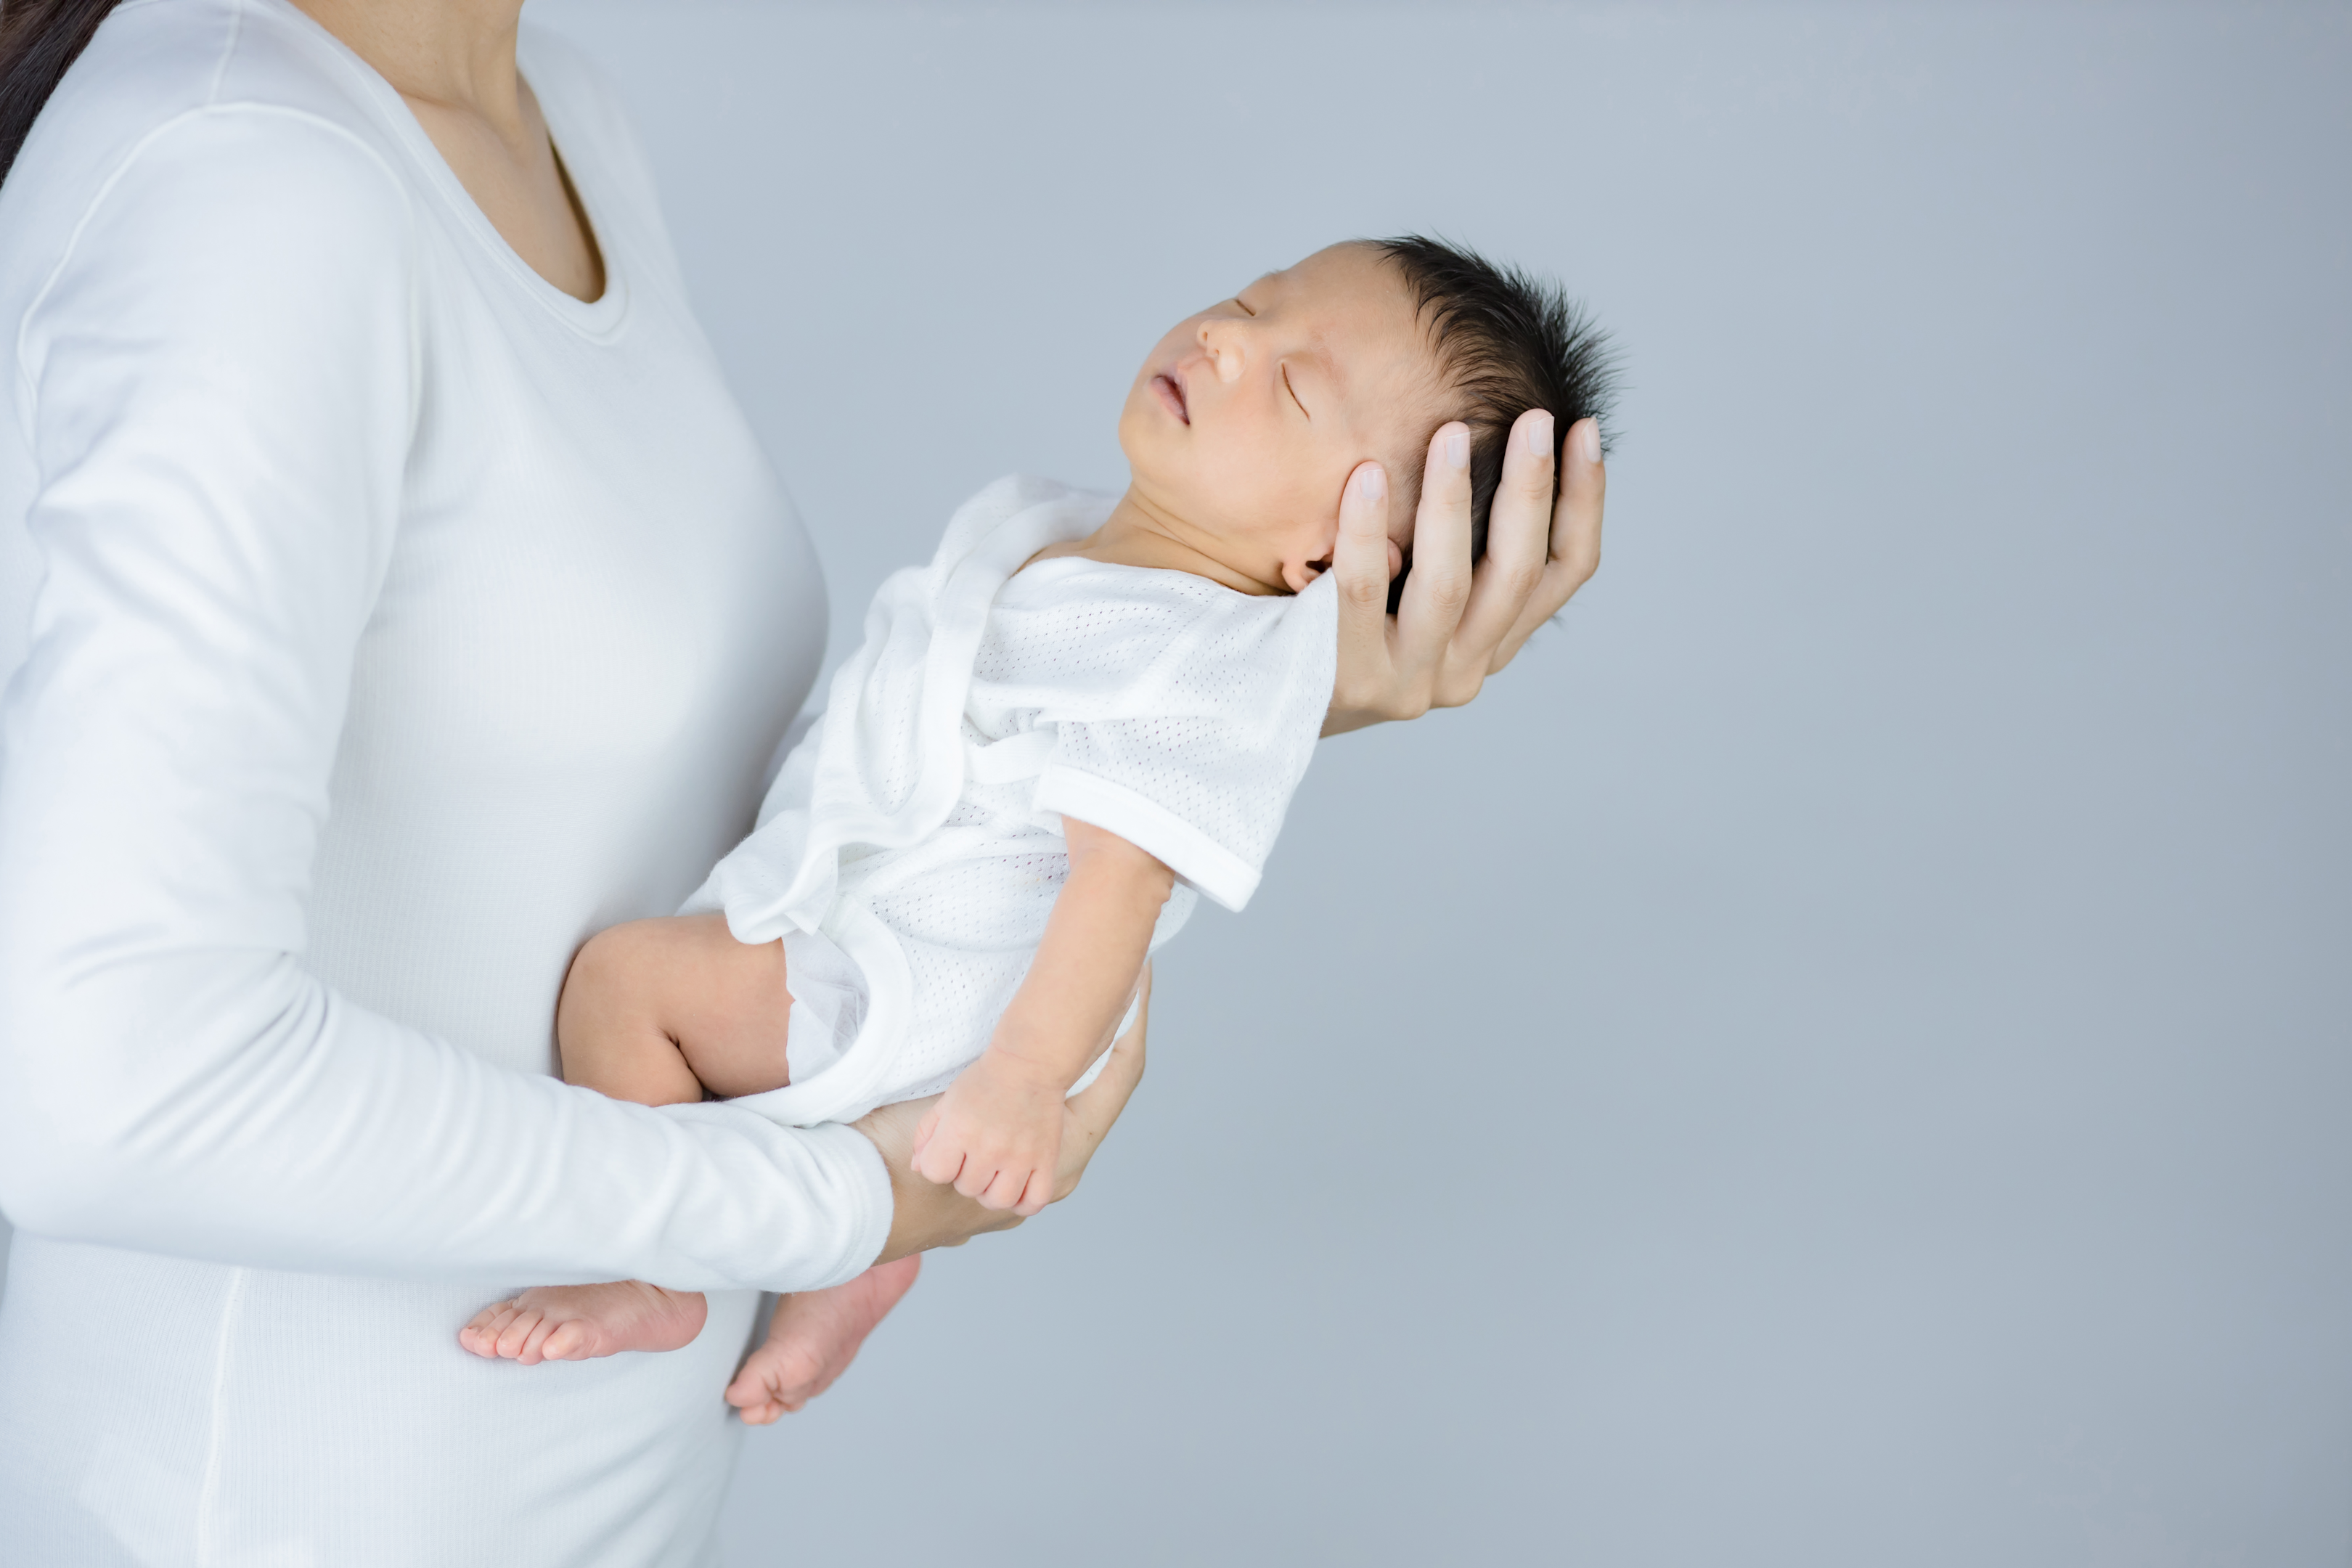 Some factors predispose your baby to acid reflux.